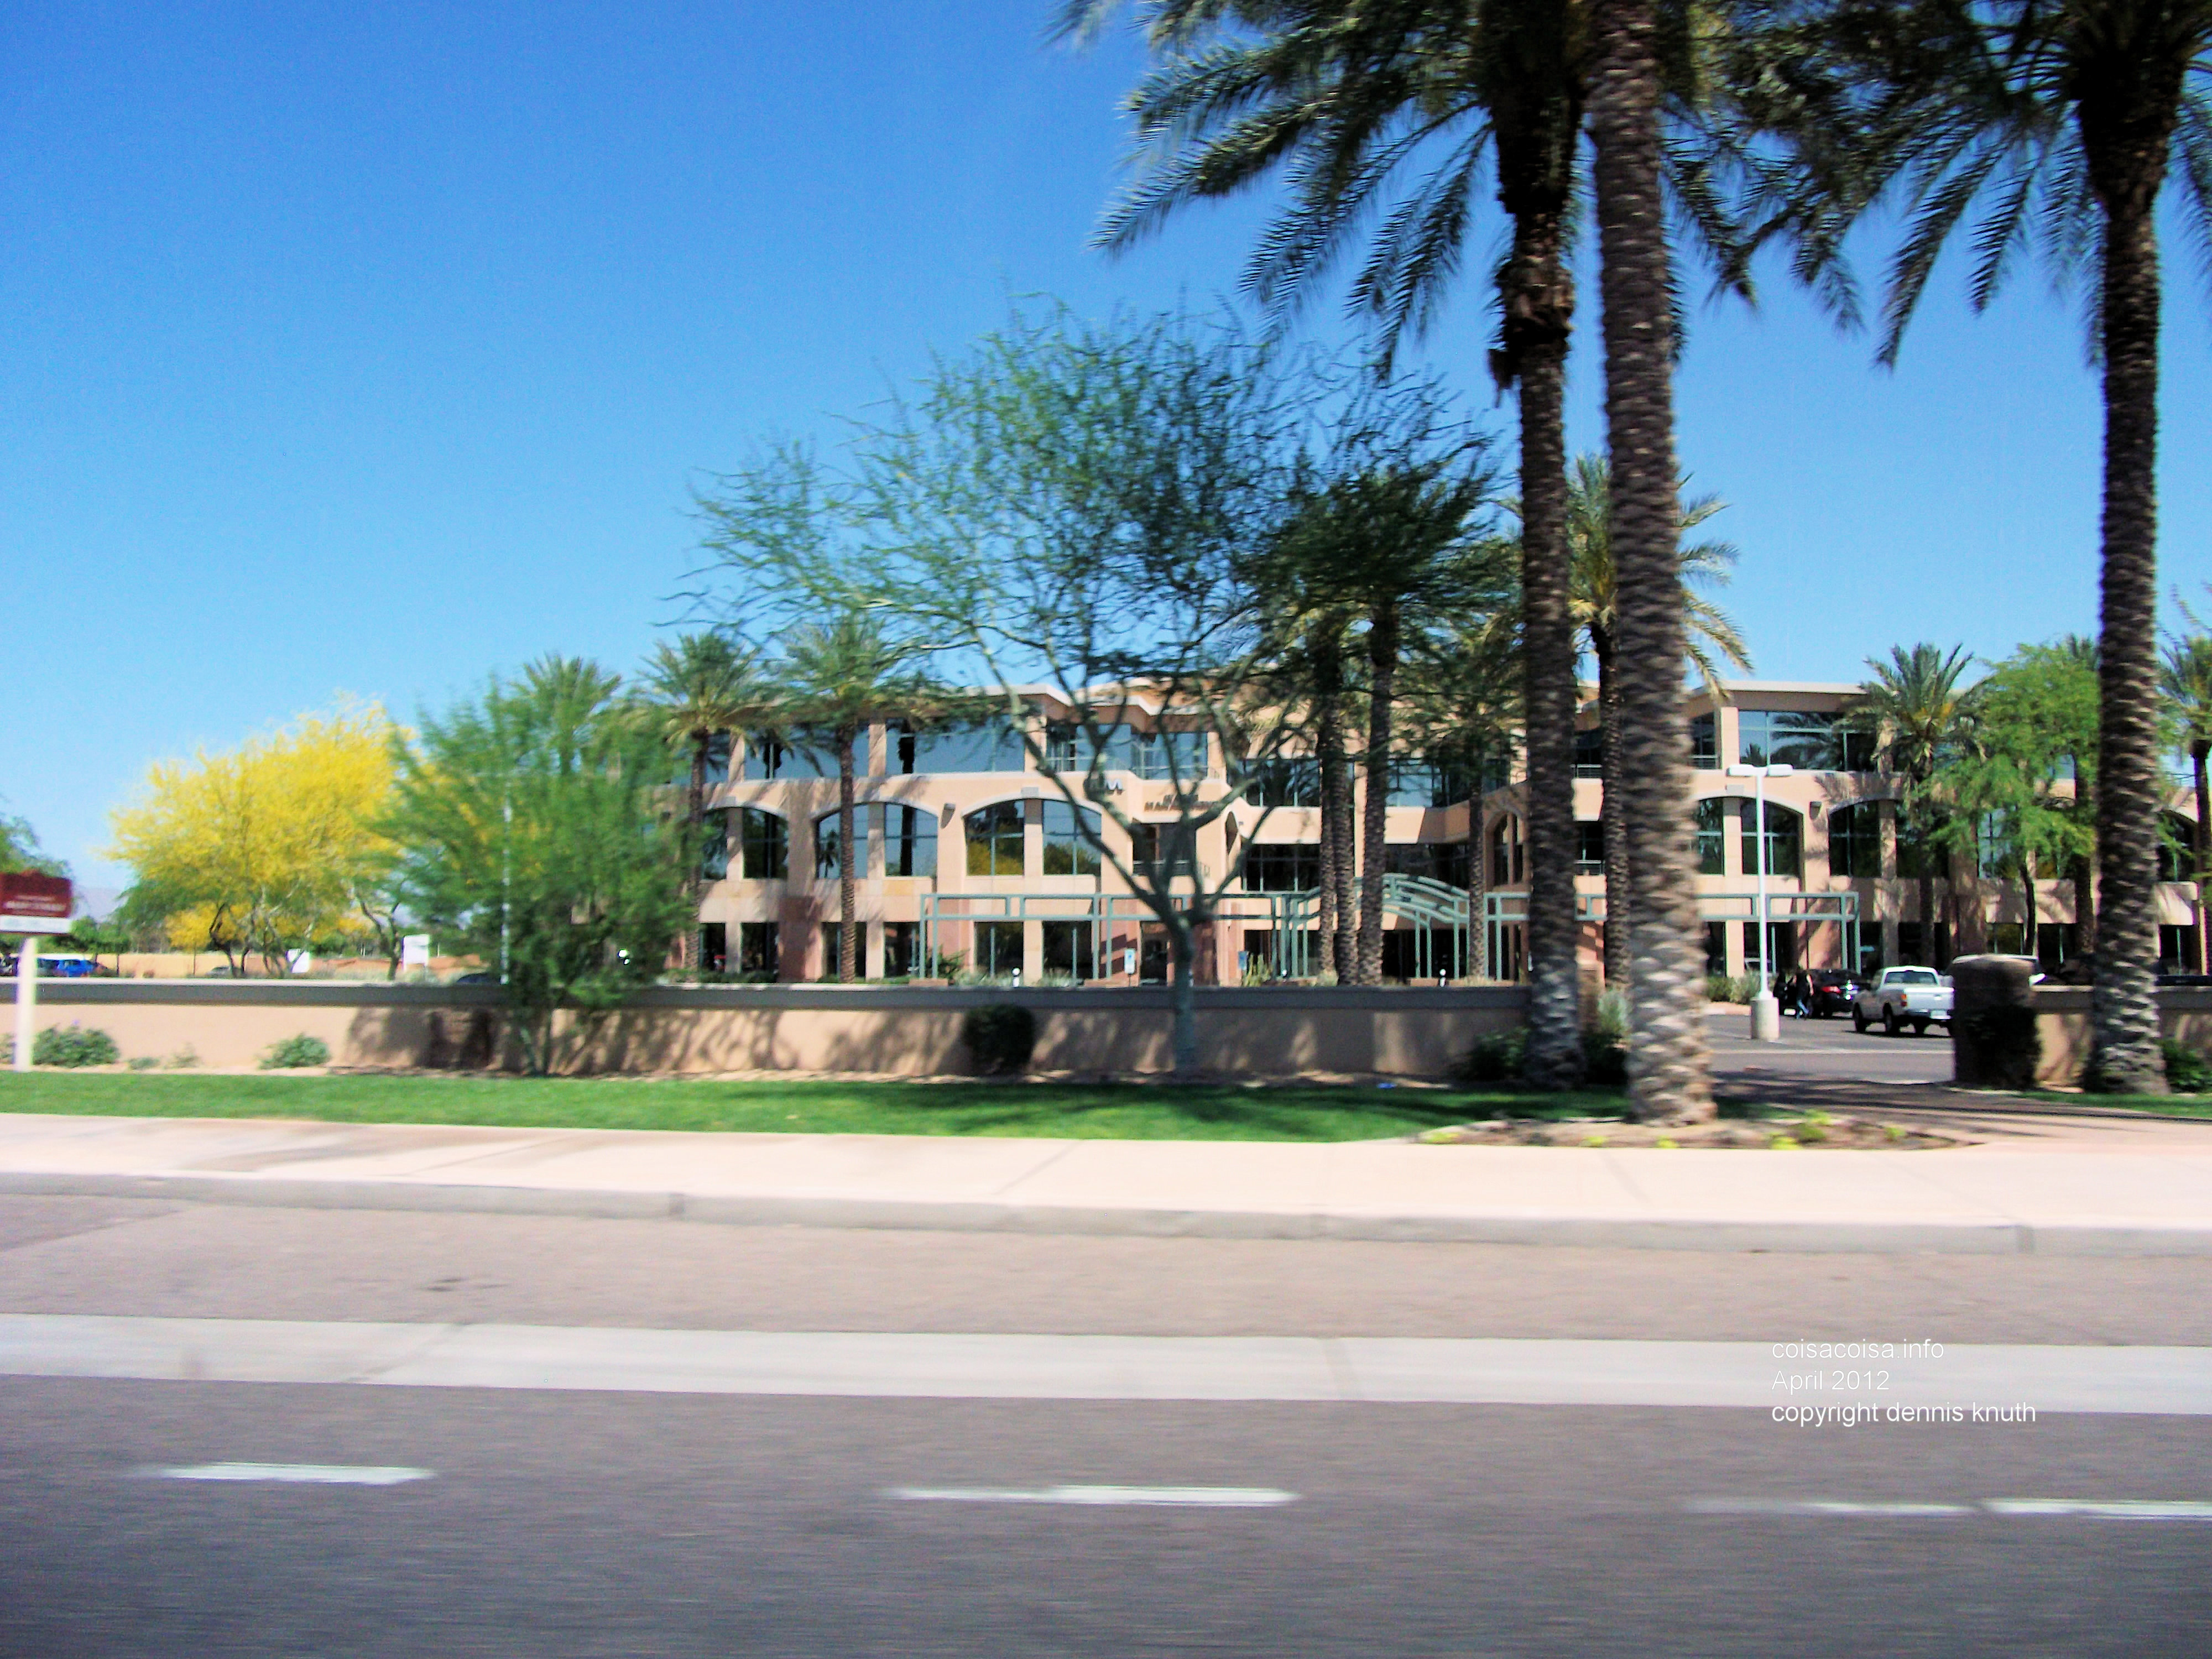 A Scottsdale Walled business community